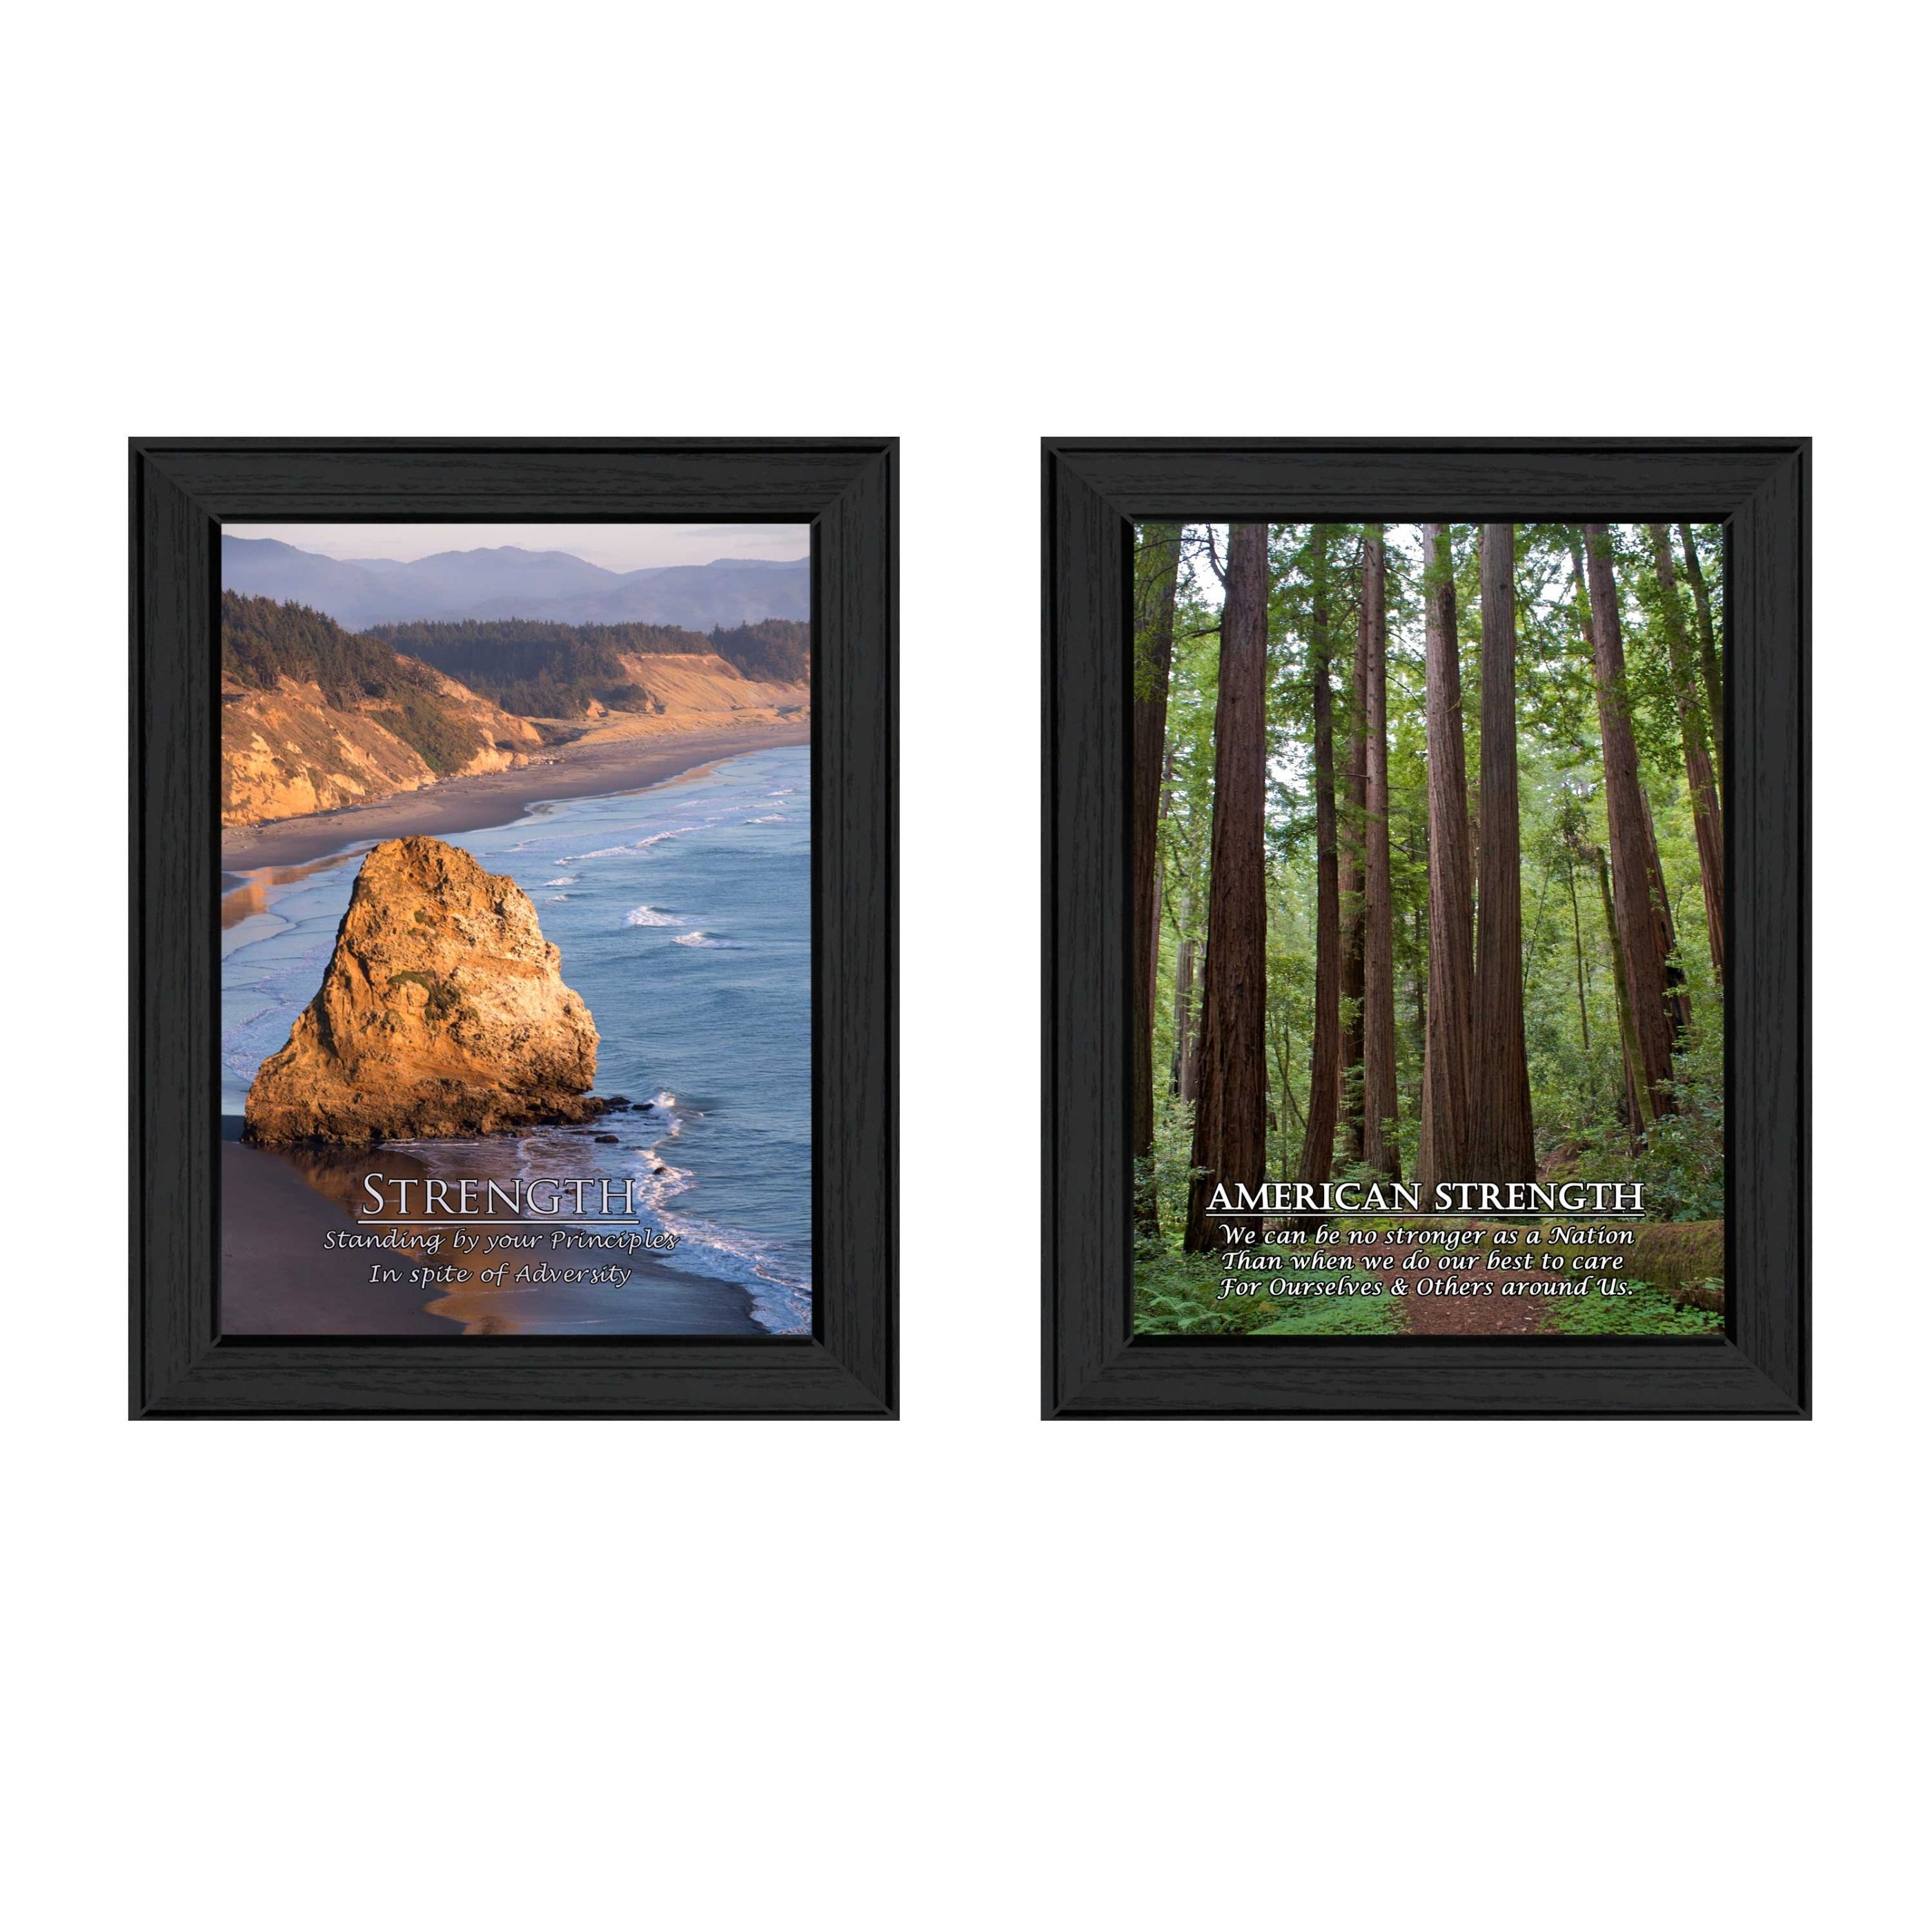 "Strength Collection" 2-Piece Vignette By Trendy Decor4U, Printed Wall Art, Ready To Hang Framed Poster, Black Frame